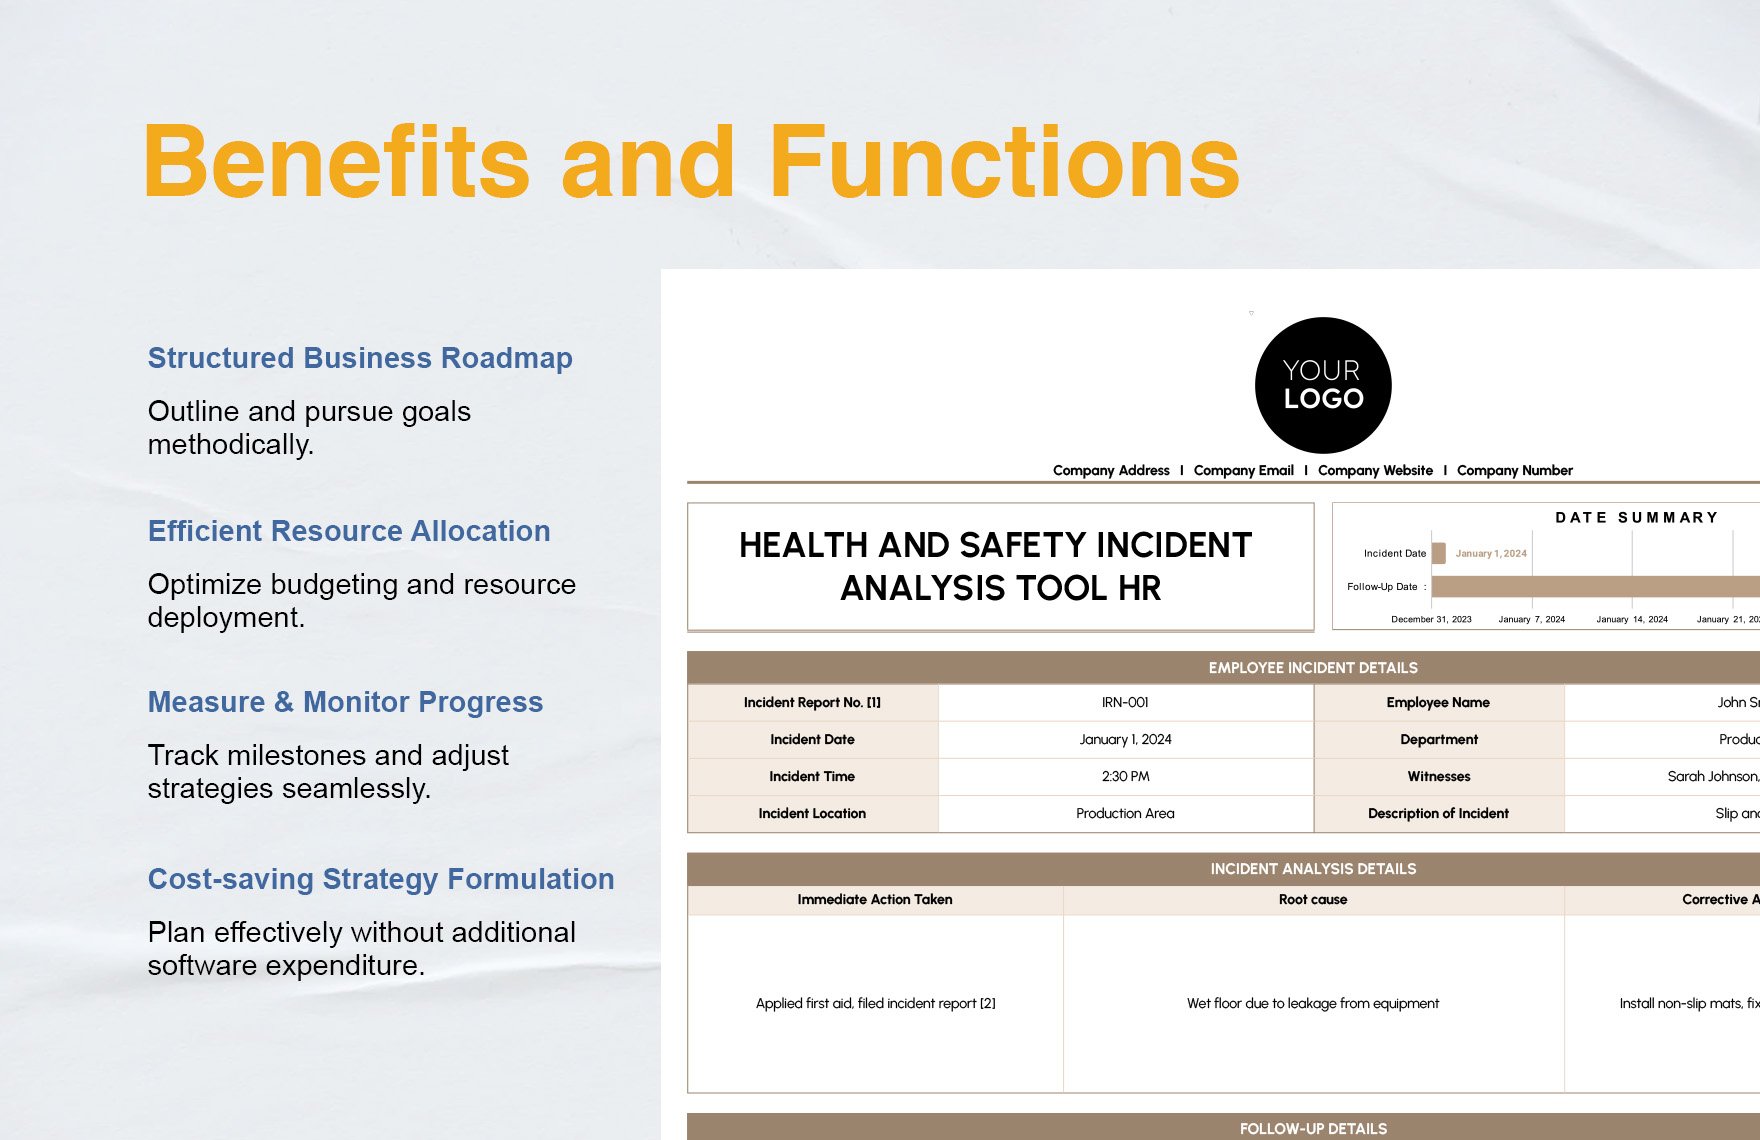 Health and Safety Incident Analysis Tool HR Template